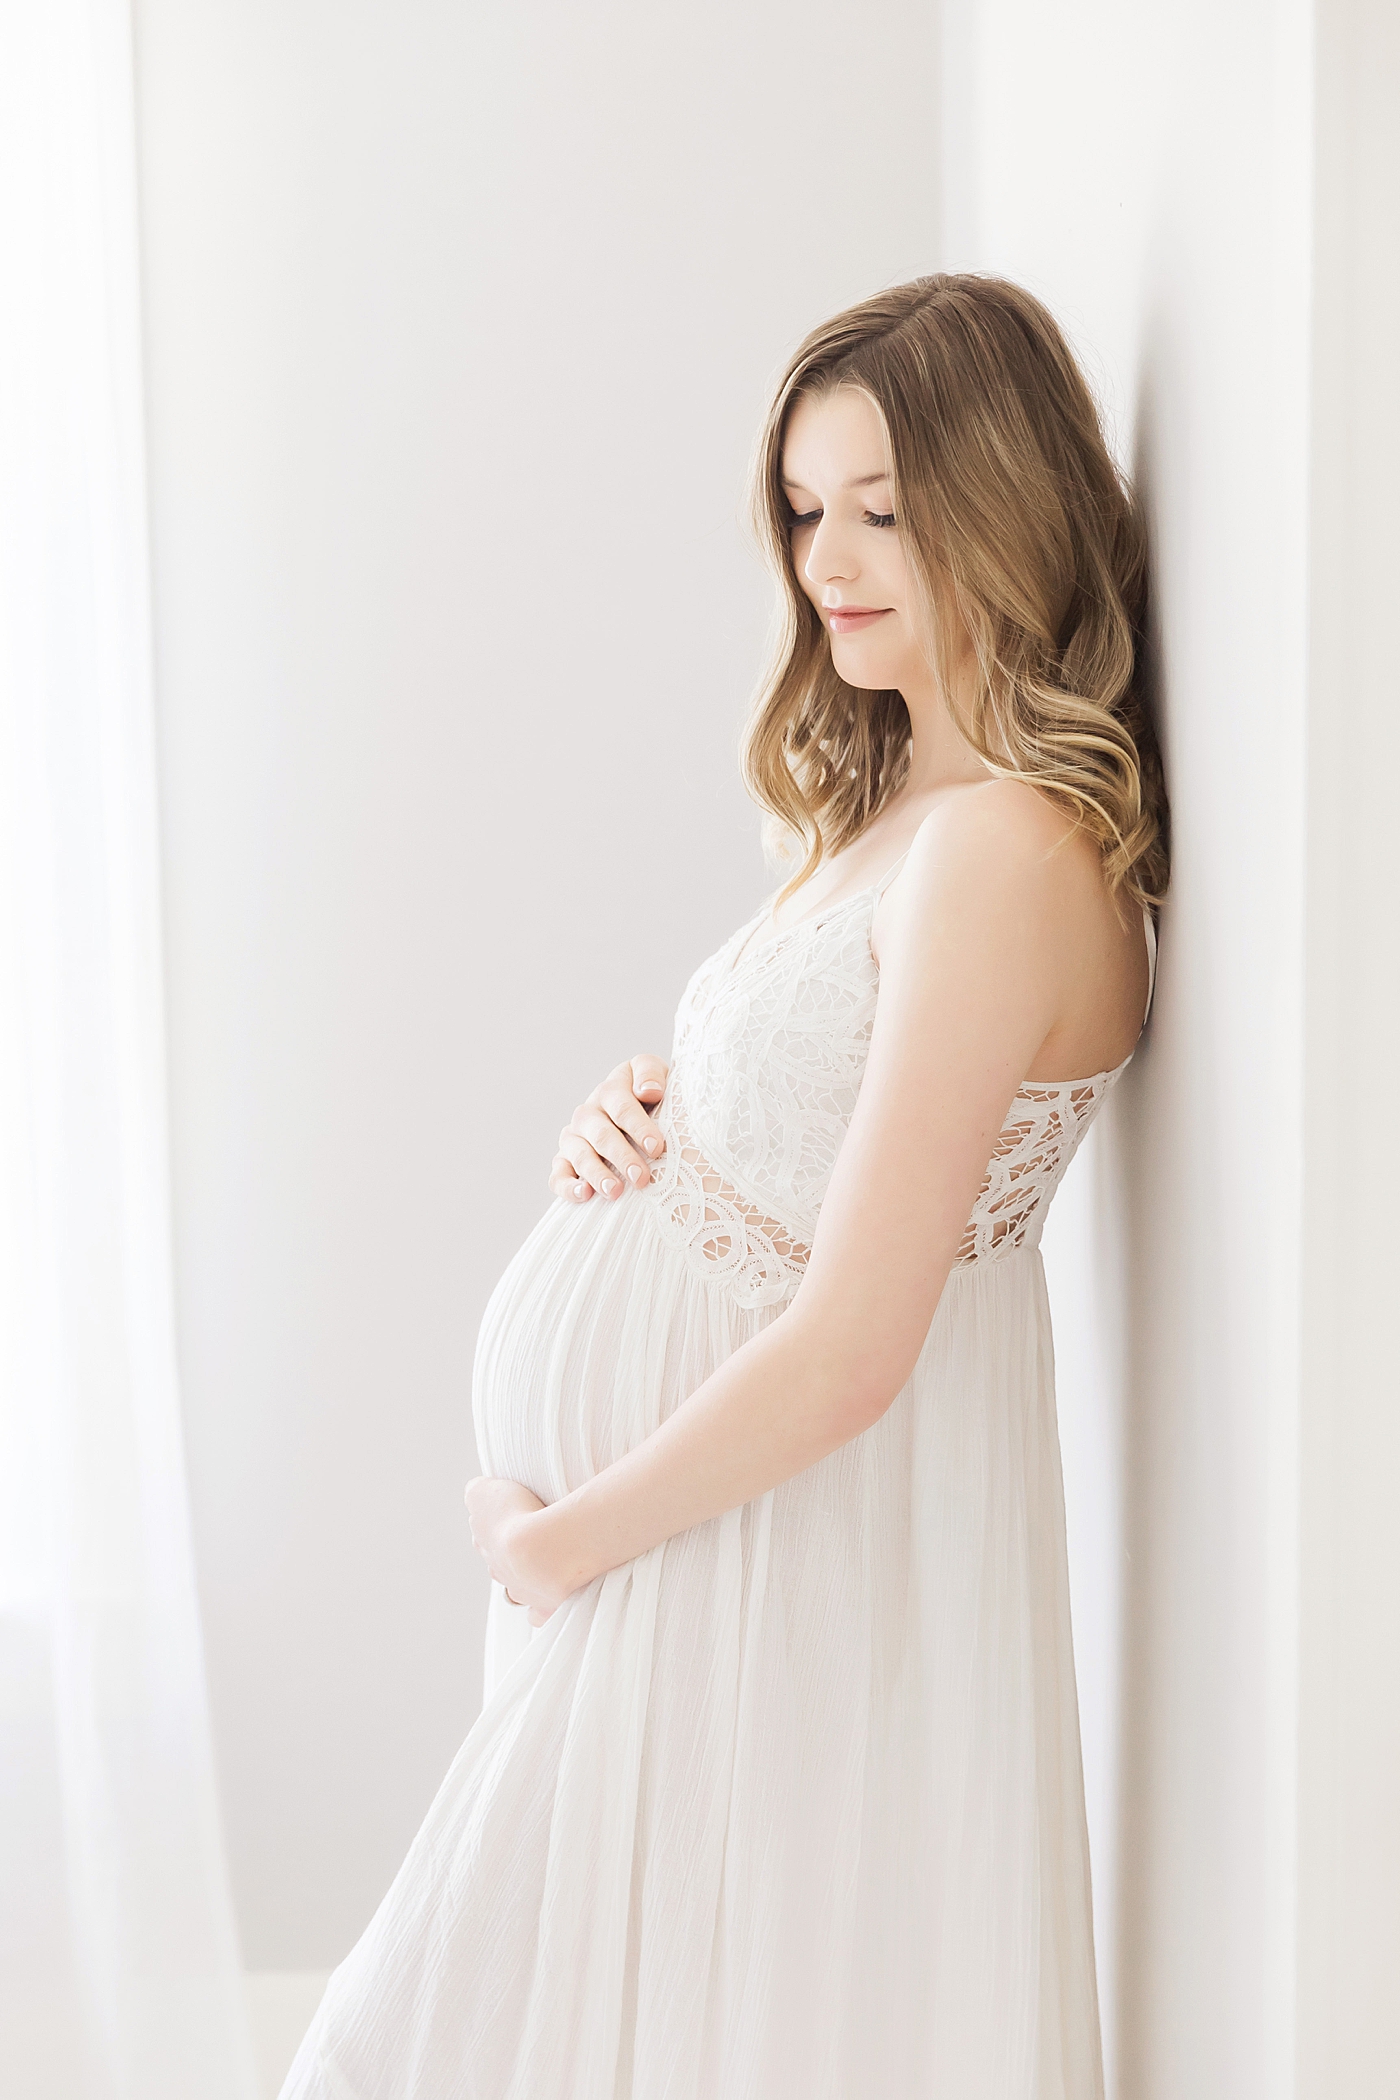 Mom in white lace dress for pregnancy photos. Photo by Fresh Light Photography.